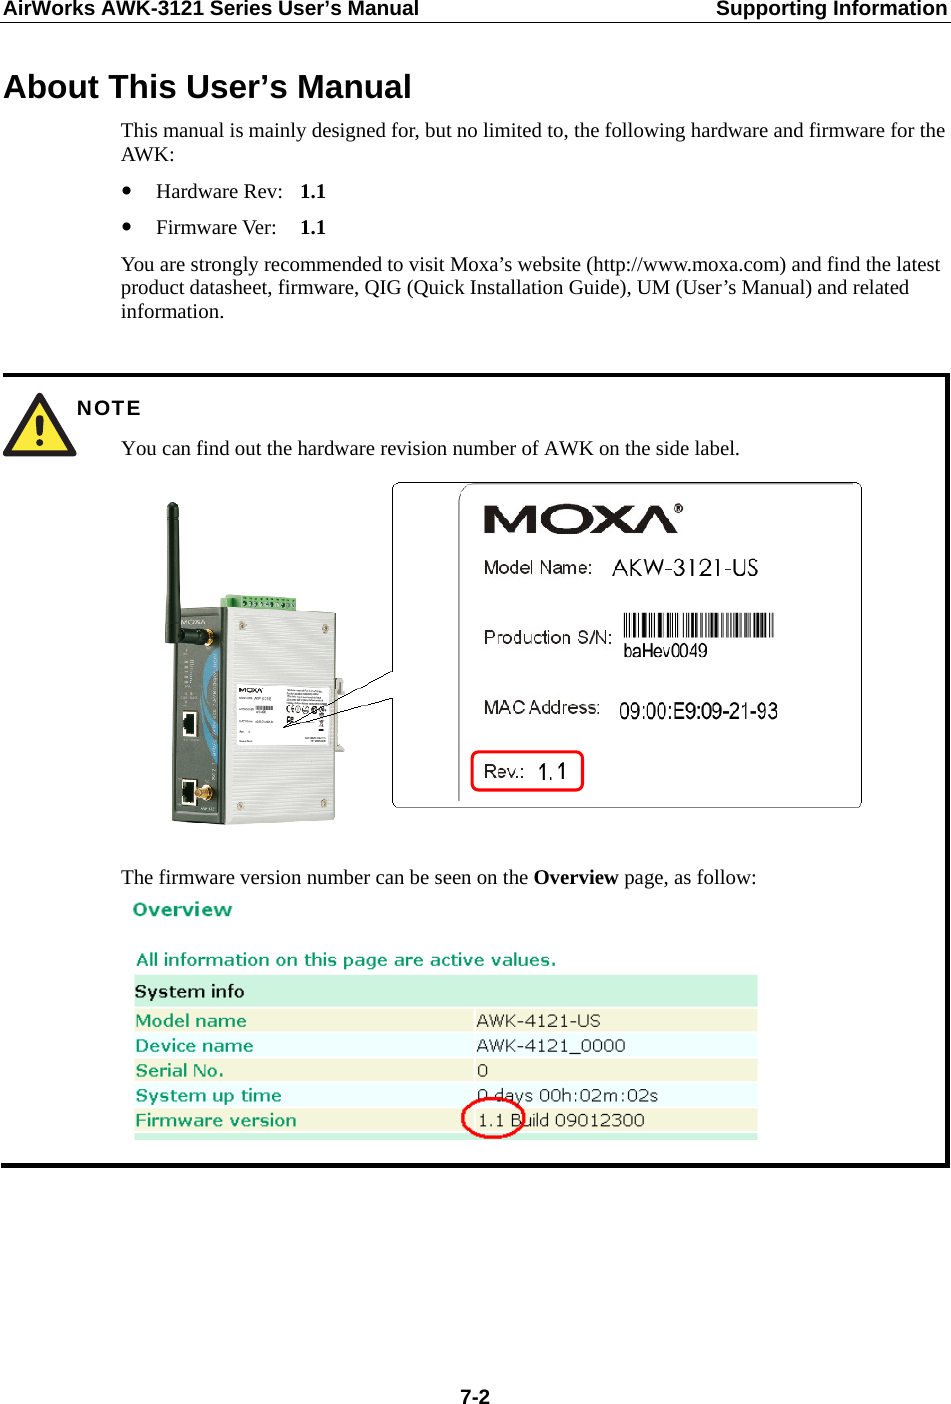 AirWorks AWK-3121 Series User’s Manual  Supporting Information  7-2About This User’s Manual This manual is mainly designed for, but no limited to, the following hardware and firmware for the AWK:  Hardware Rev:   1.1  Firmware Ver:    1.1 You are strongly recommended to visit Moxa’s website (http://www.moxa.com) and find the latest product datasheet, firmware, QIG (Quick Installation Guide), UM (User’s Manual) and related information.   NOTE You can find out the hardware revision number of AWK on the side label.   The firmware version number can be seen on the Overview page, as follow:      